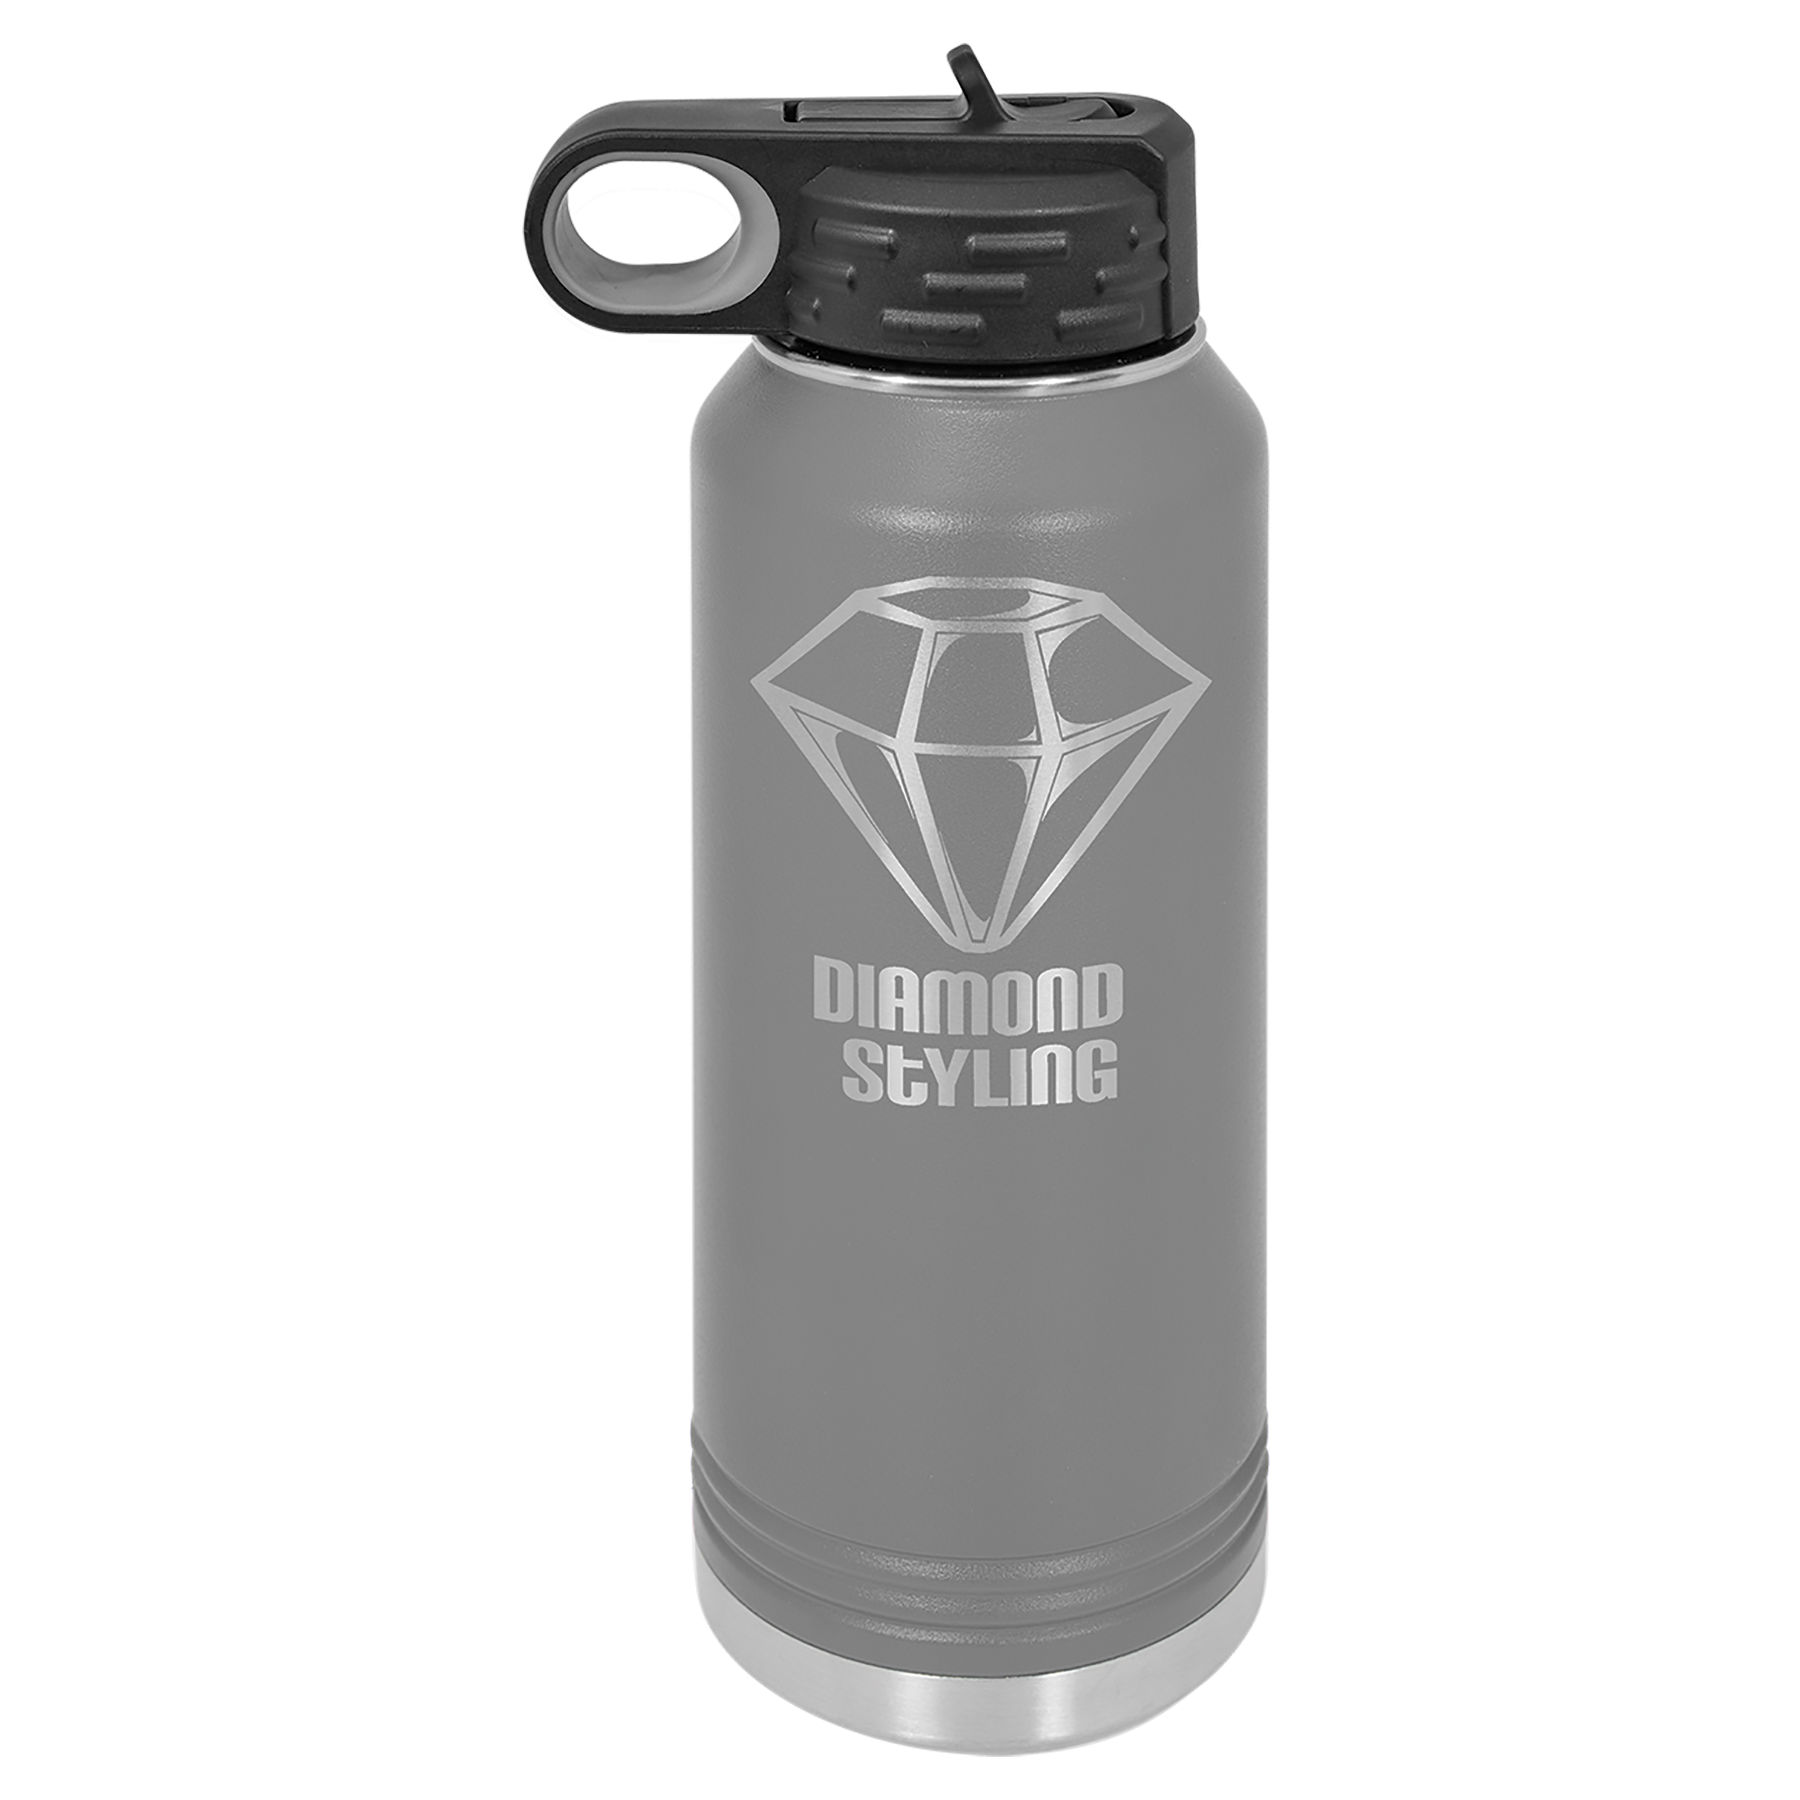 32 oz. Dark Gray Stainless Steel Insulated Water Bottler.  Customizable with your personal image or saying.